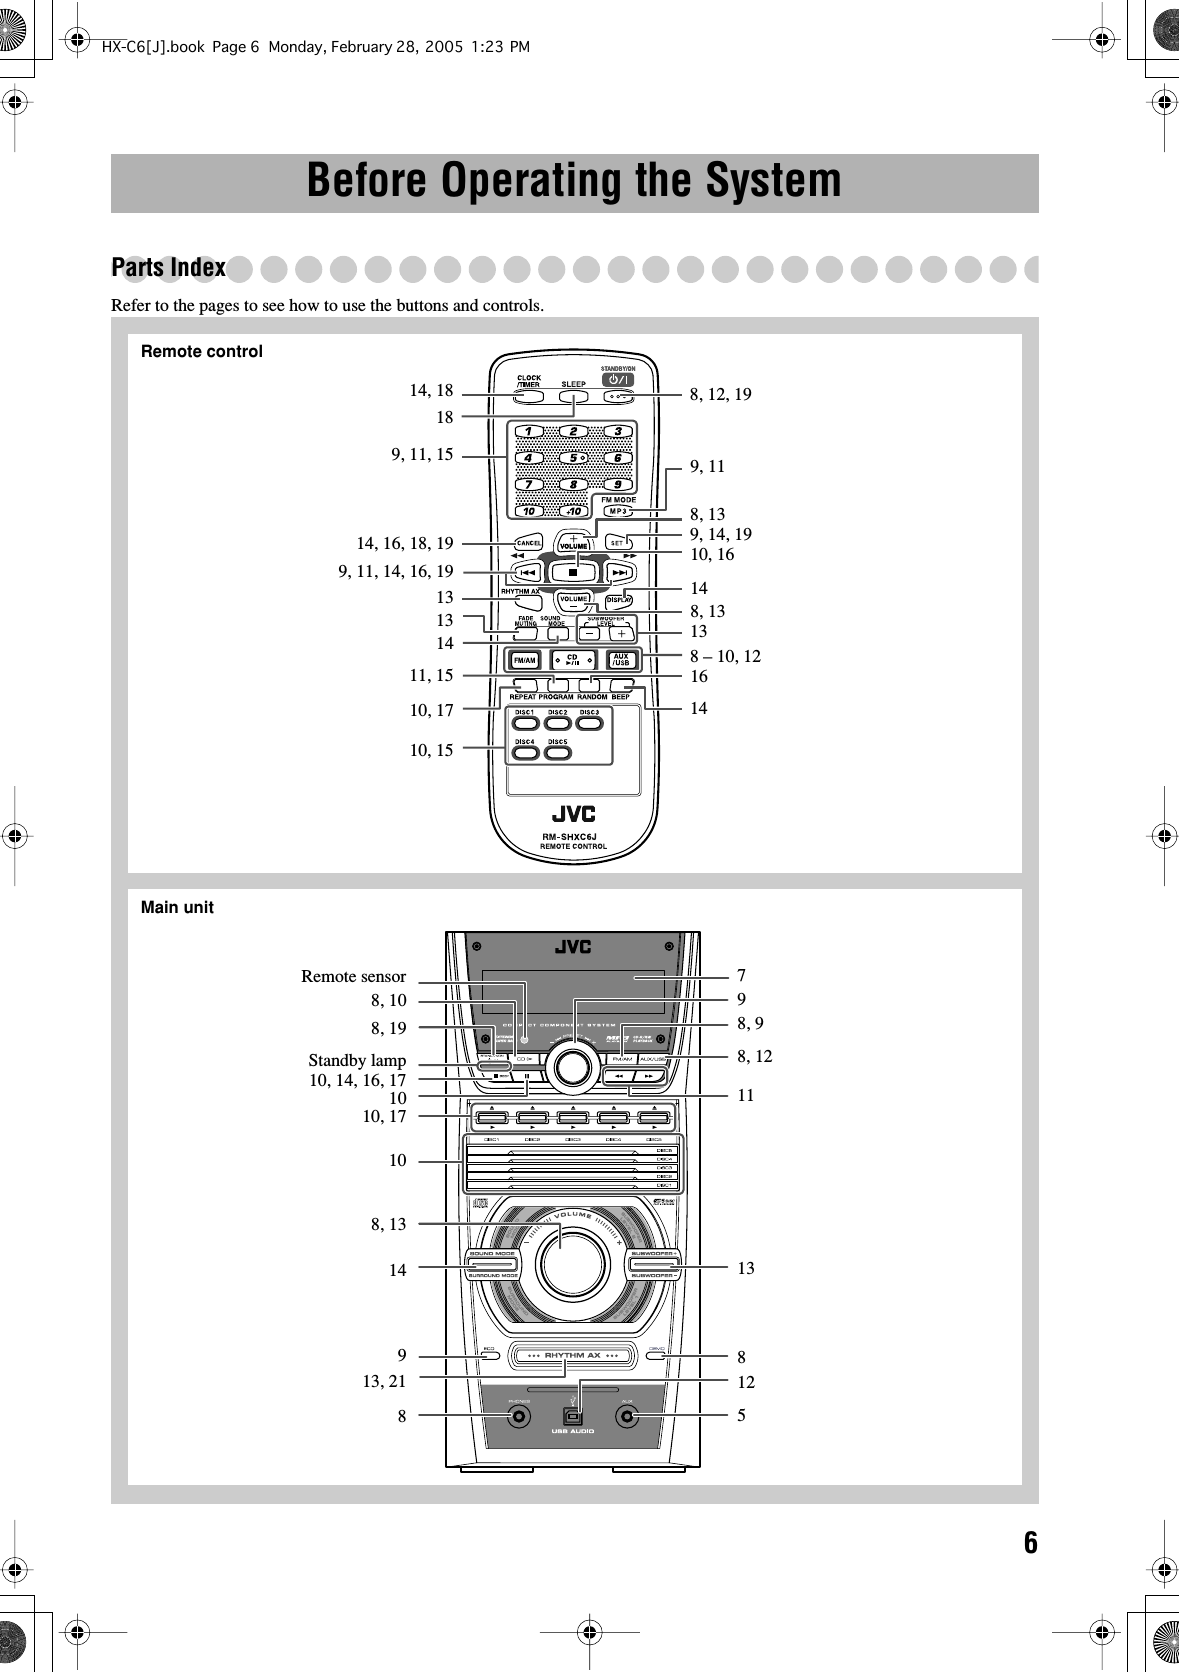  6 Before Operating the System Parts Index Refer to the pages to see how to use the buttons and controls.Main unitRemote control8, 1312Remote sensor5118, 128, 971010, 14, 16, 178, 198, 1013891481013, 21910, 178, 12, 199, 11, 15139, 11, 14, 16, 1914, 16, 18, 191814, 181410, 169, 118, 138, 1310, 1510, 1711, 1513148 – 10, 129, 14, 19161314Standby lampHX-C6[J].book Page 6 Monday, February 28, 2005 1:23 PM